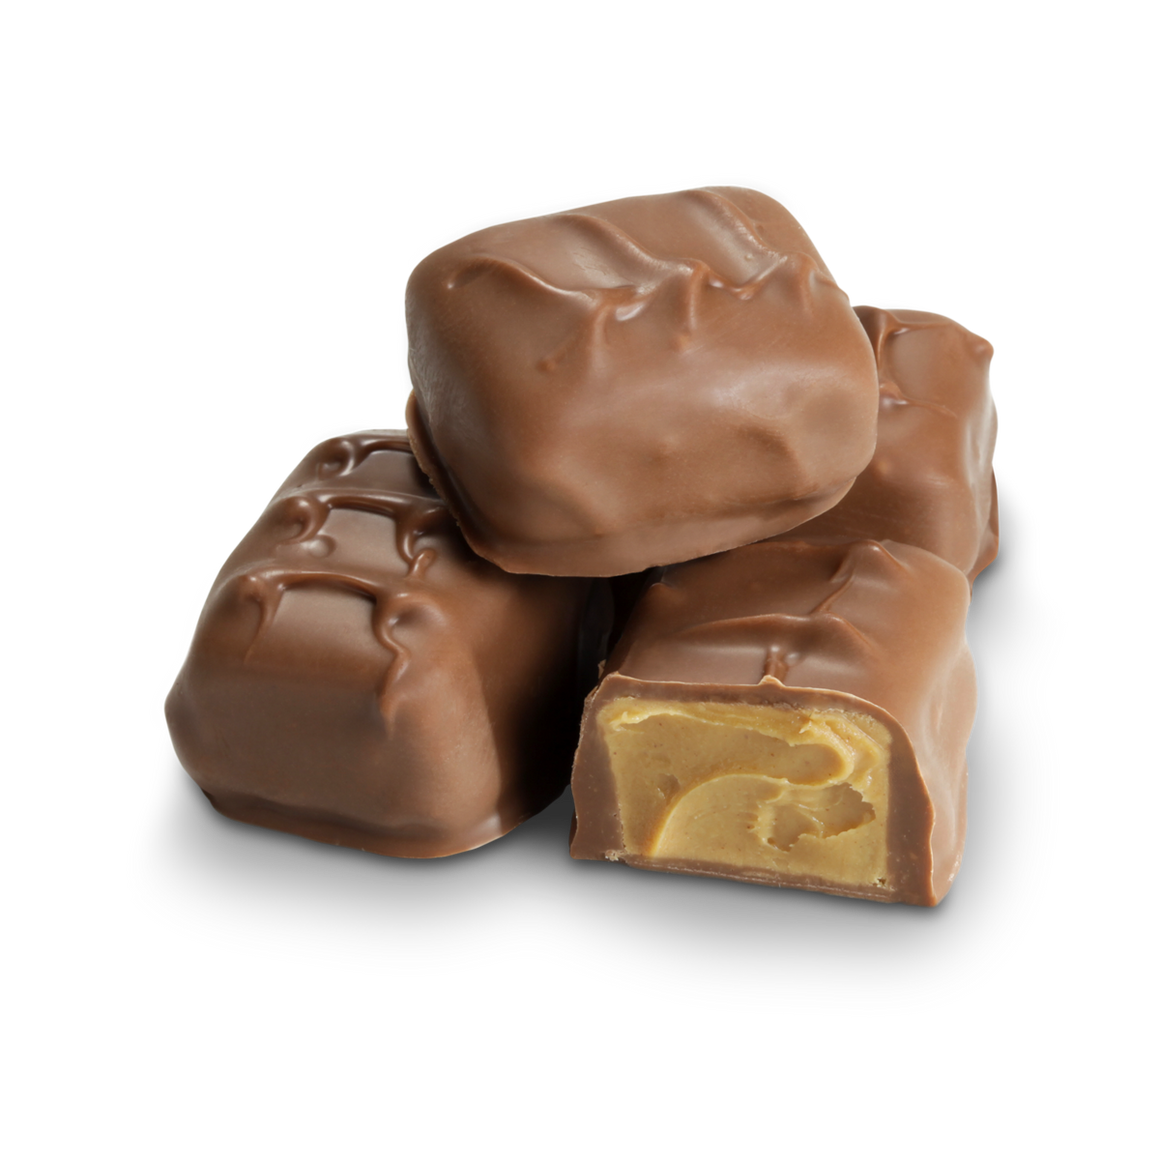 All City Candy Milk Chocolate Peanut Butter Meltaways - 1 LB Box Chocolate Albanese Confectionery For fresh candy and great service, visit www.allcitycandy.com